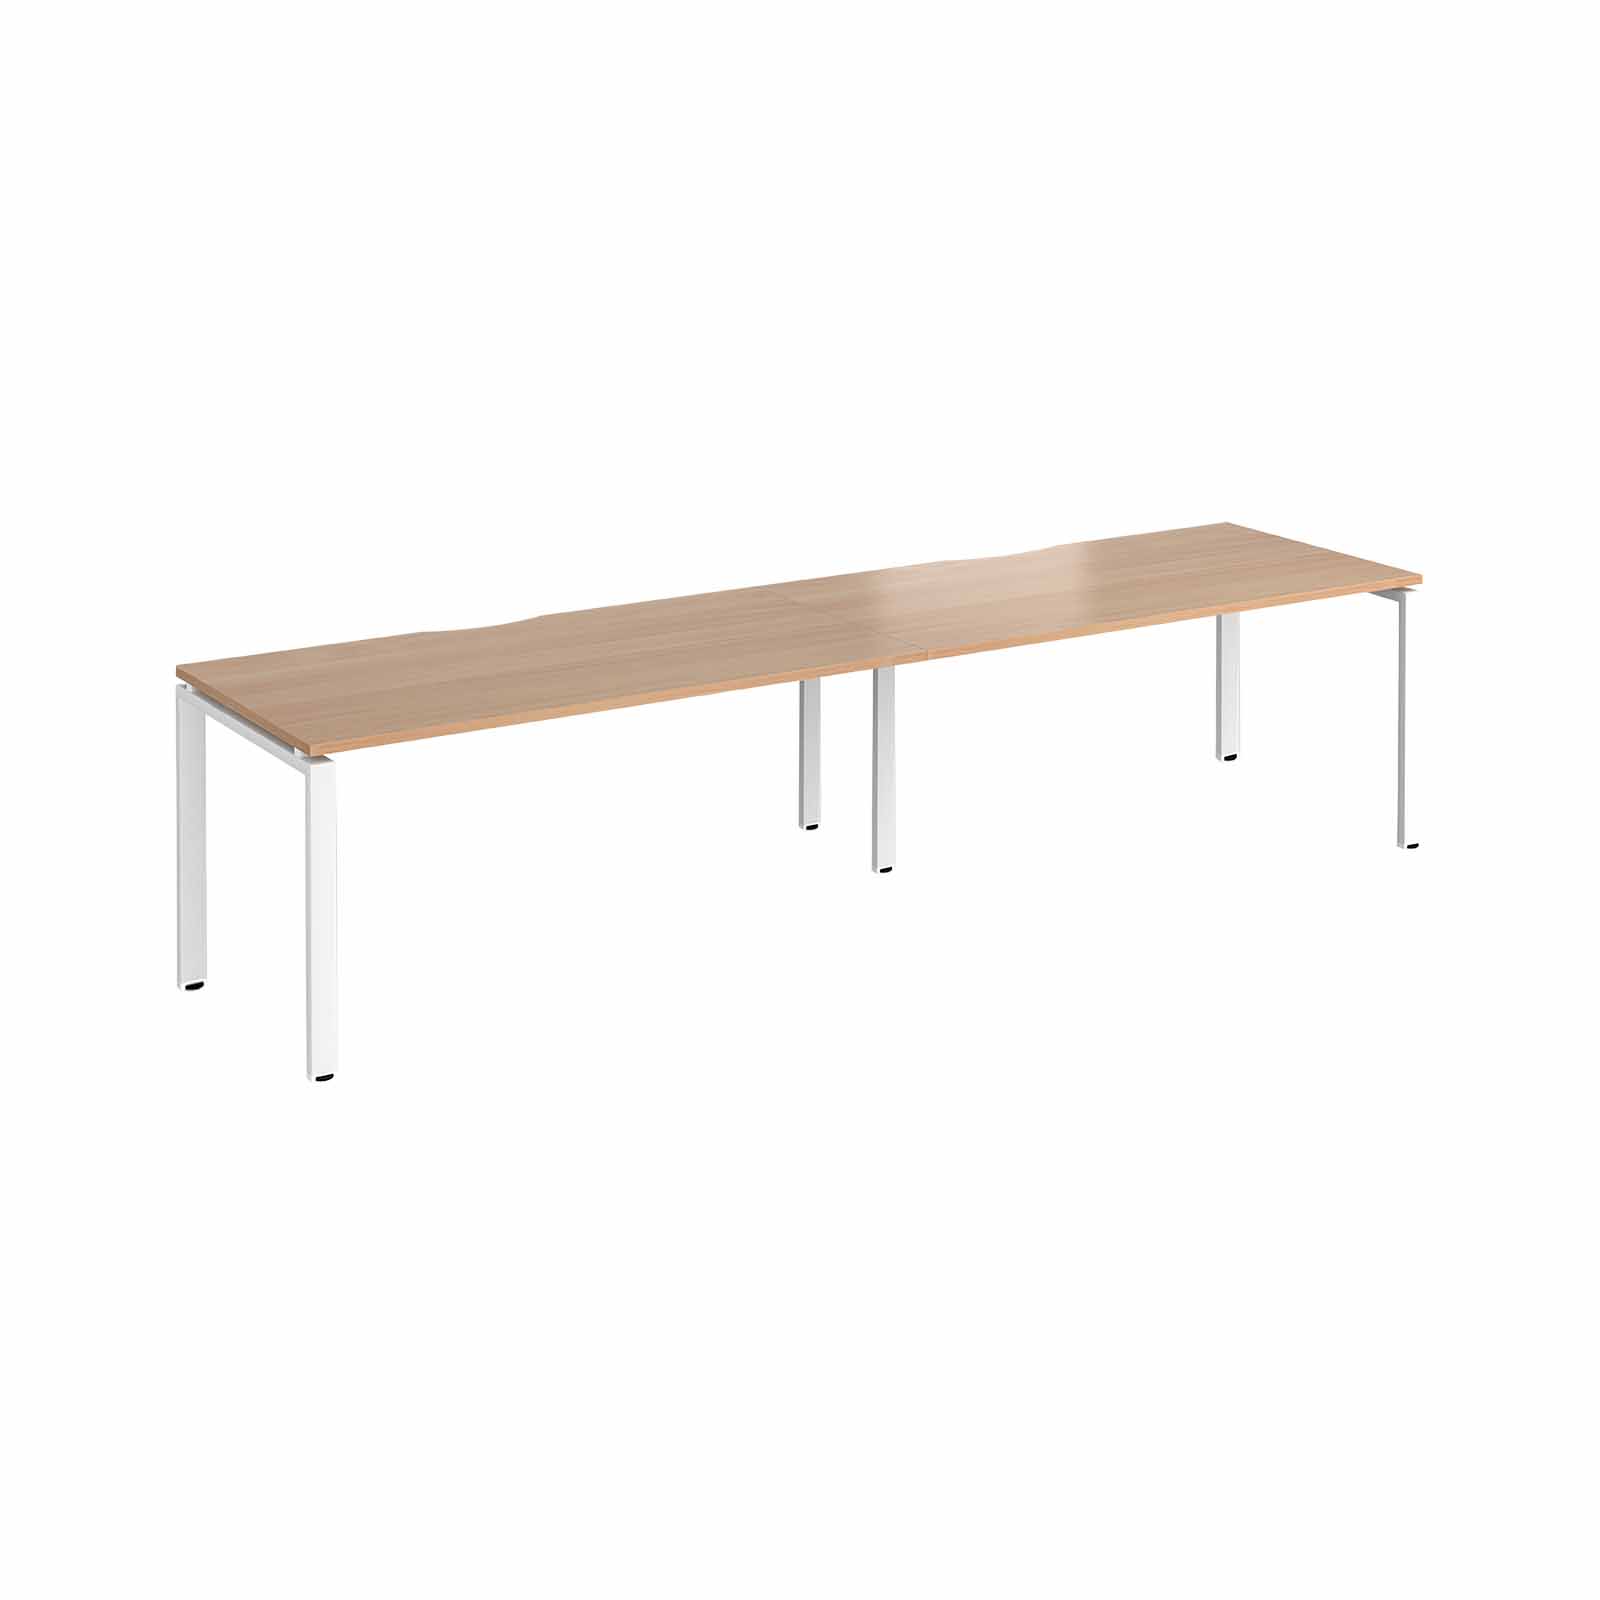 MADE TO ORDER 2 Person Single Row Bench Desk W1000mm x D600mm x H740mm